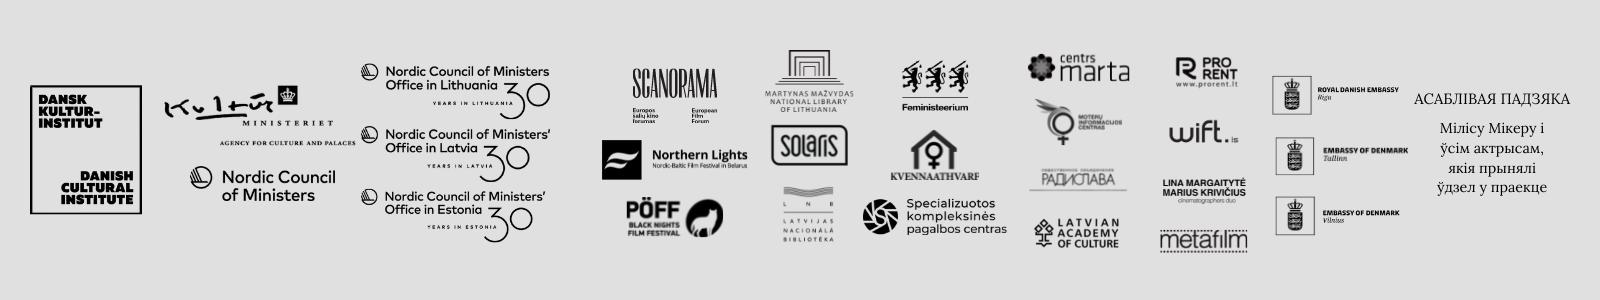 logos, voices of violence, Belarusian, nordic council of ministers, scanorama, Poff, Black night stars, Northern lights,